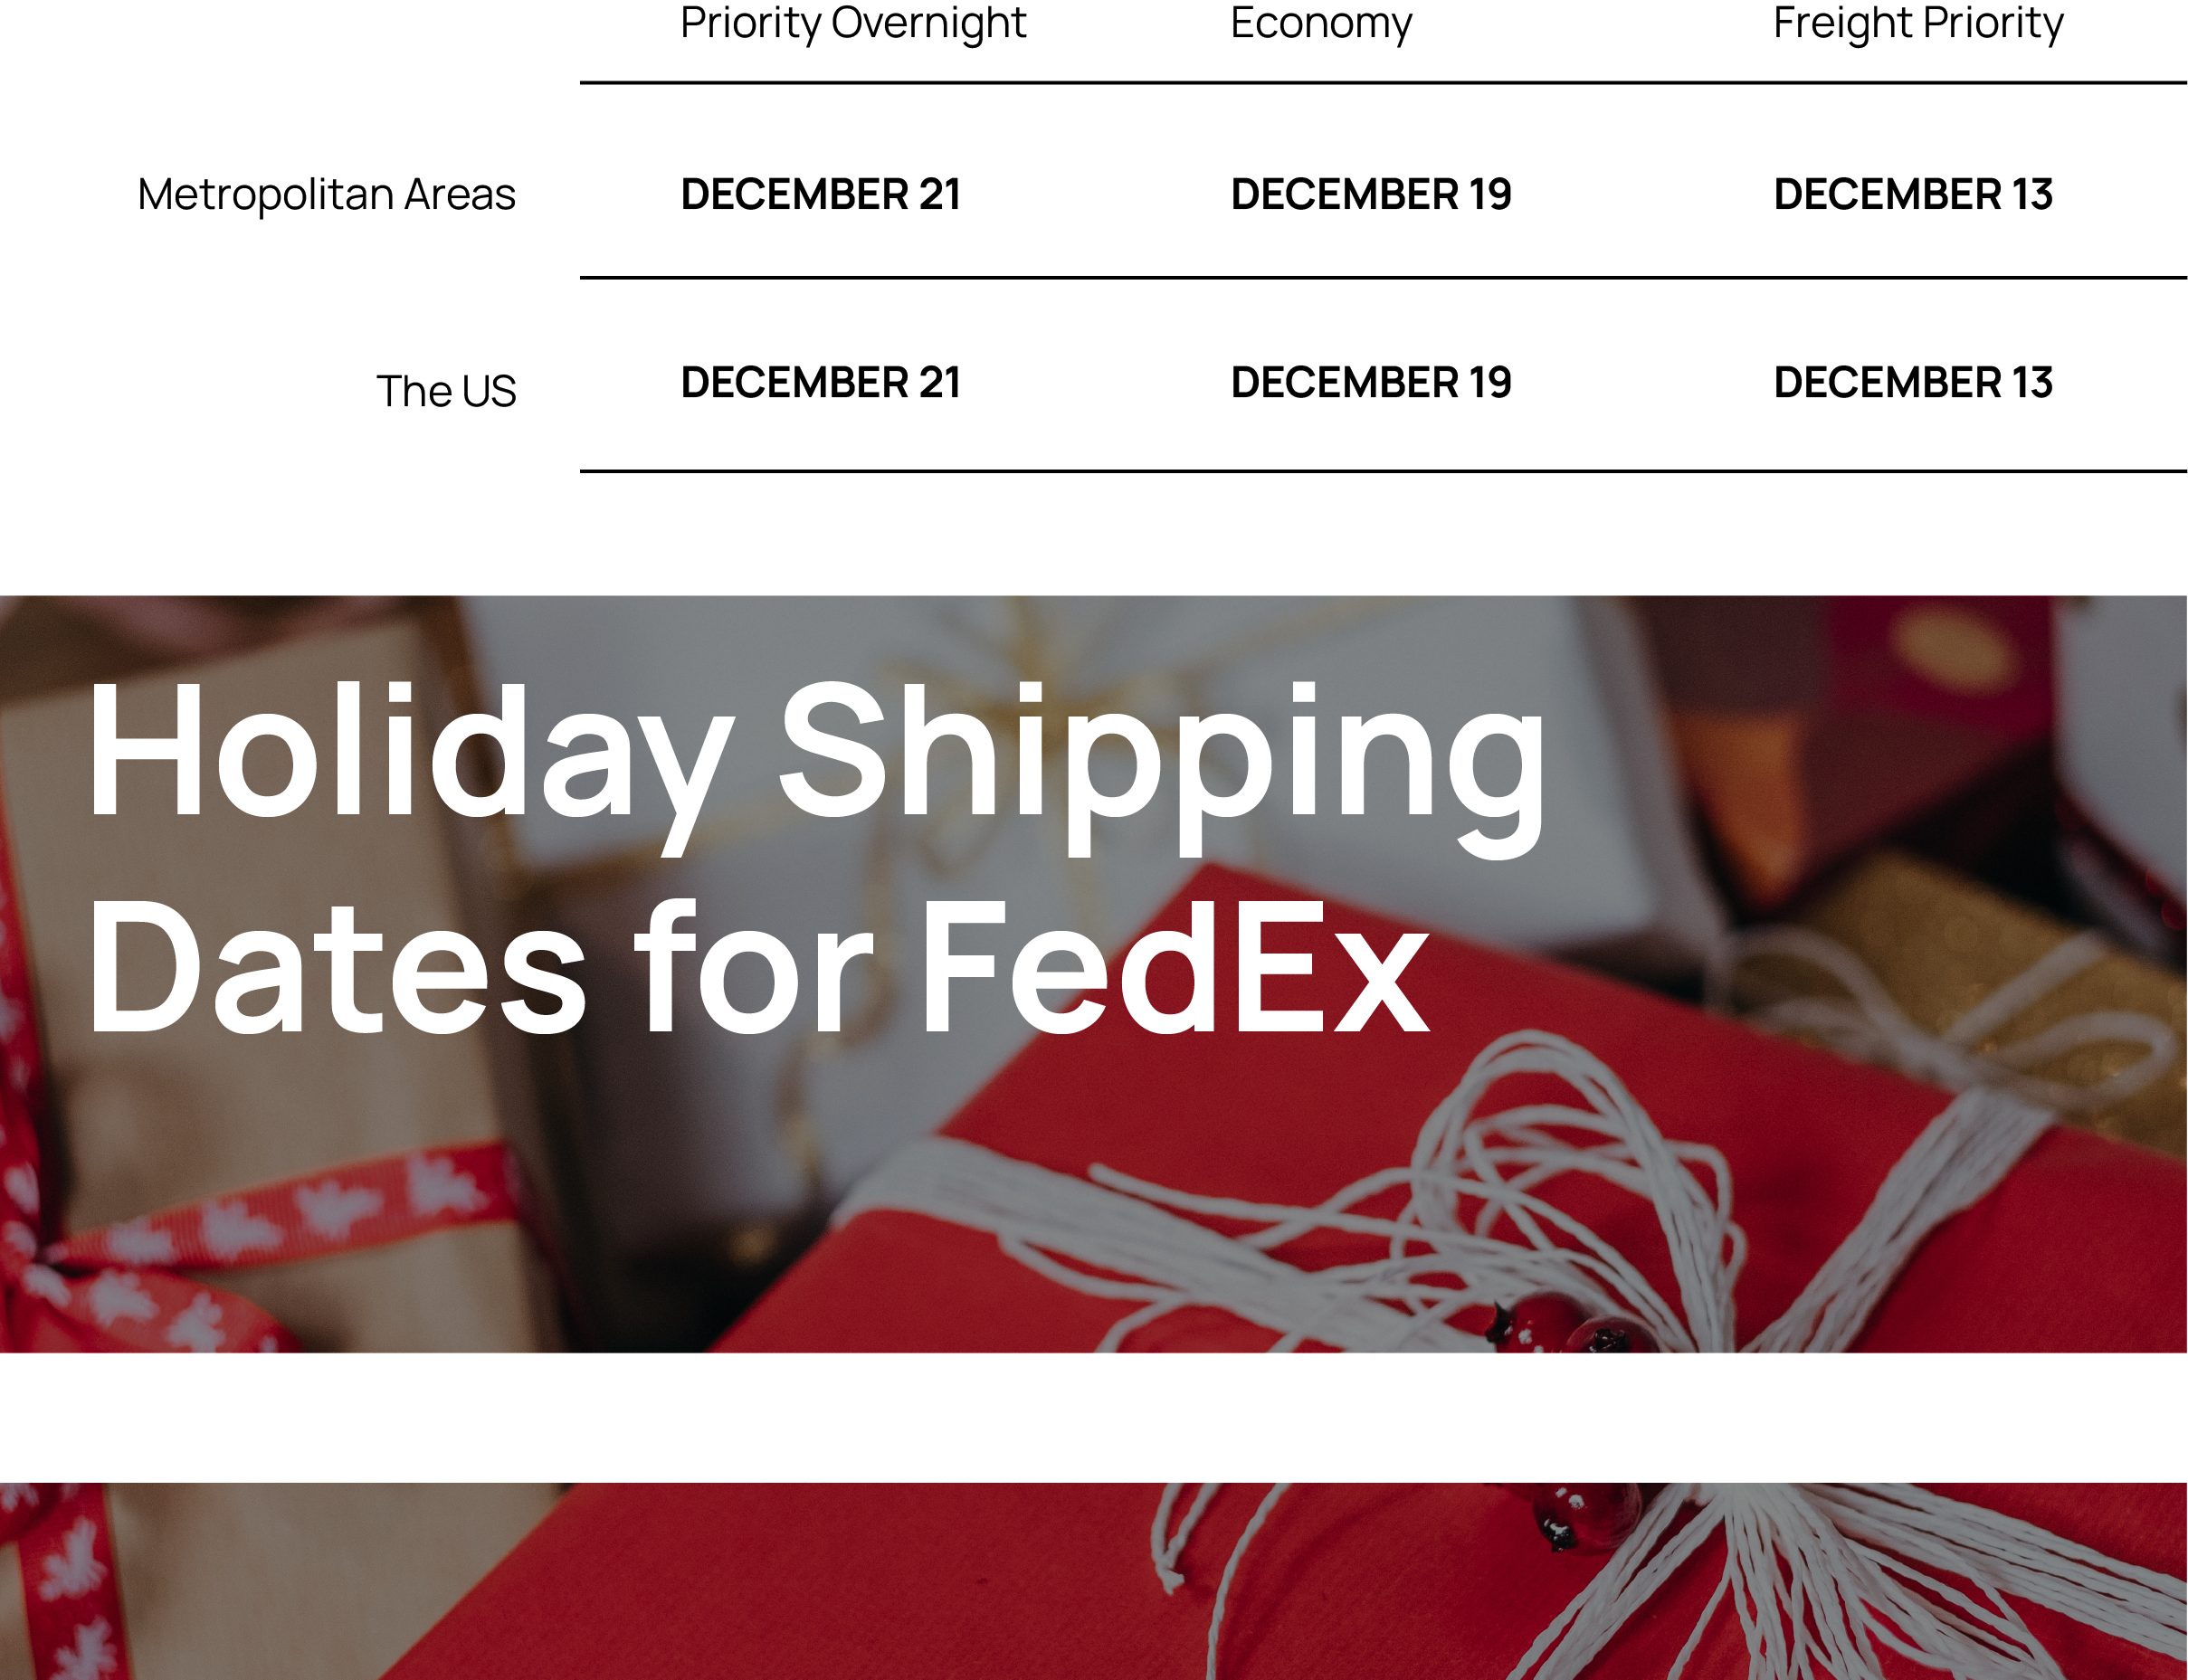 Holiday shipping deadlines for Fed Ex